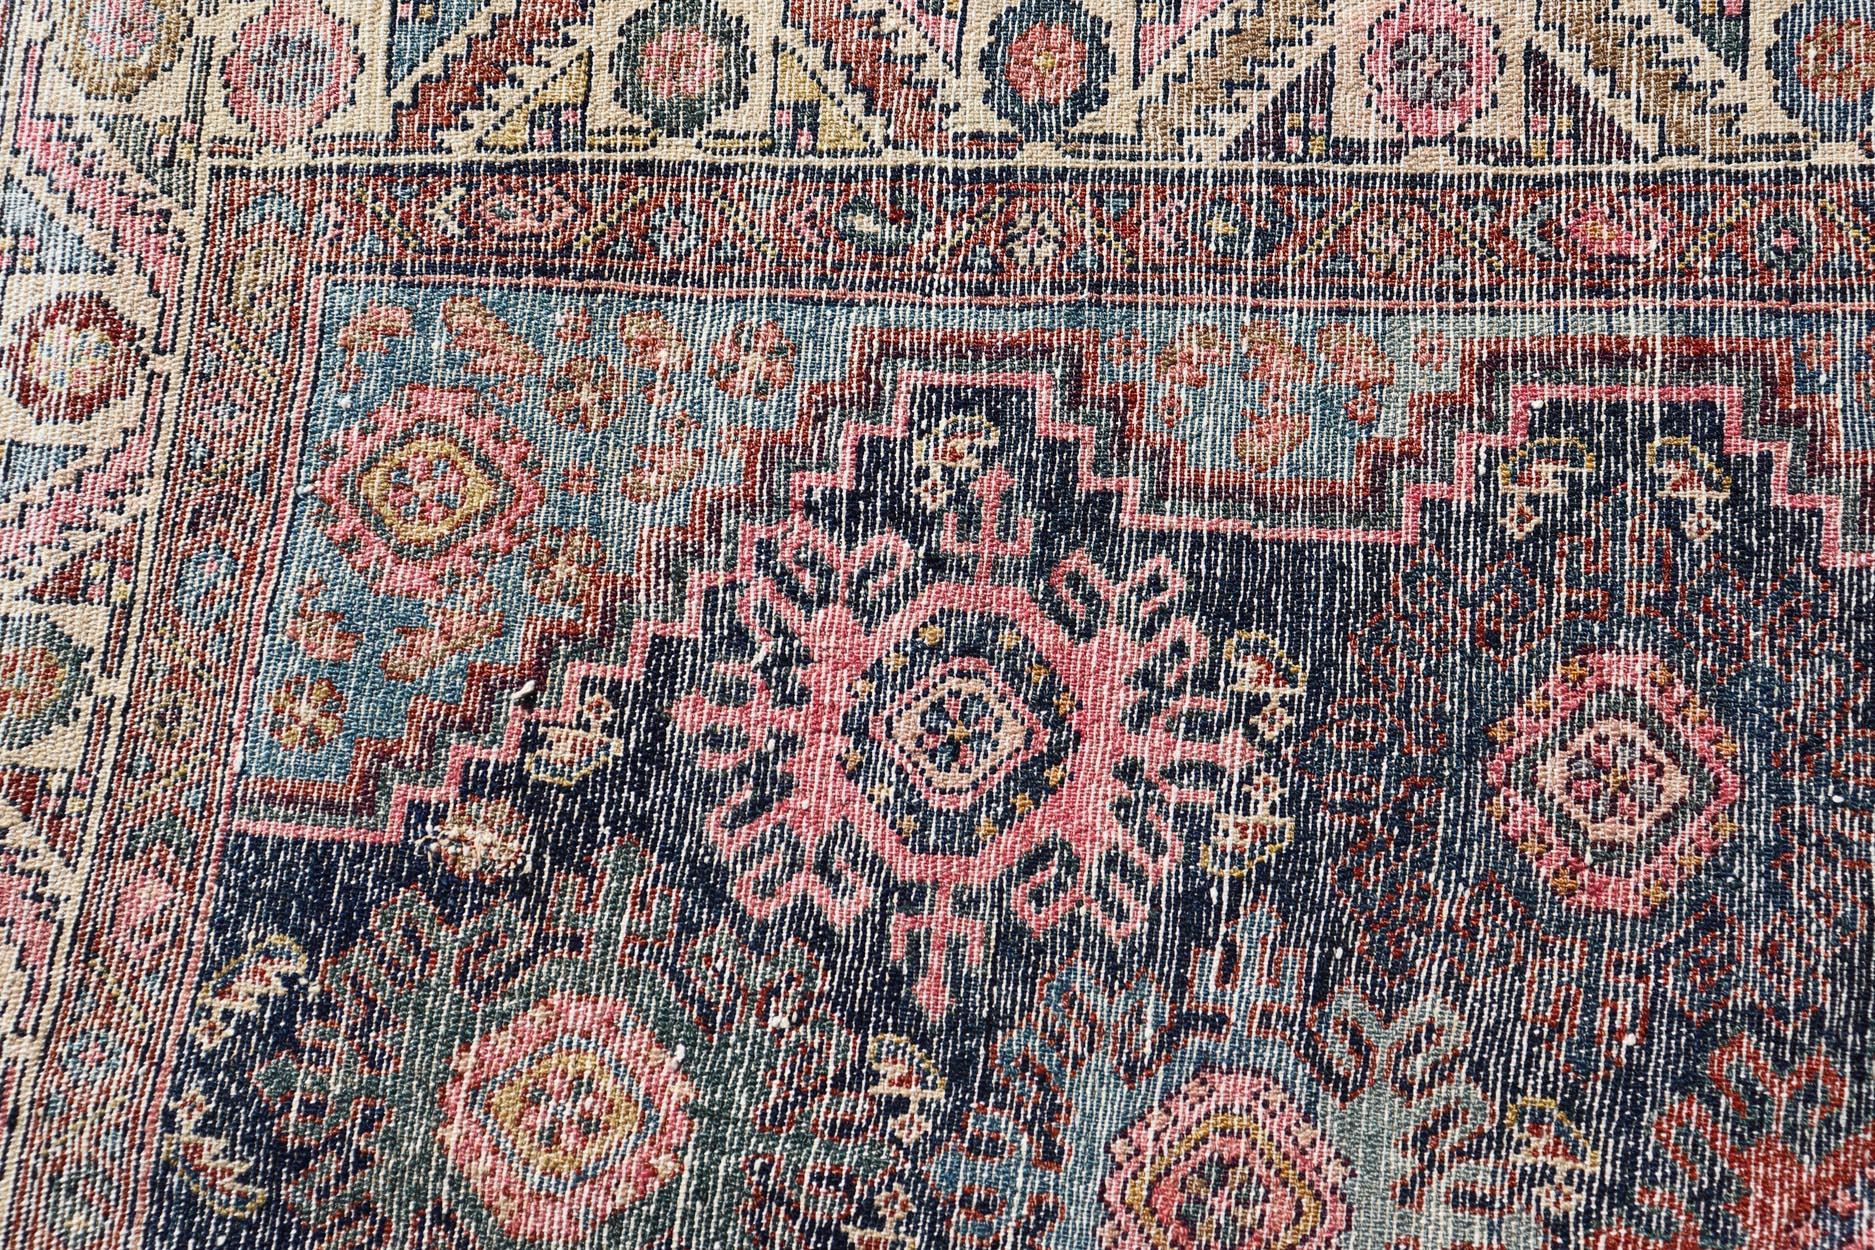 Antique Persian Hamadan Runner with All-Over Geometric Motifs In Jewel Tones For Sale 8